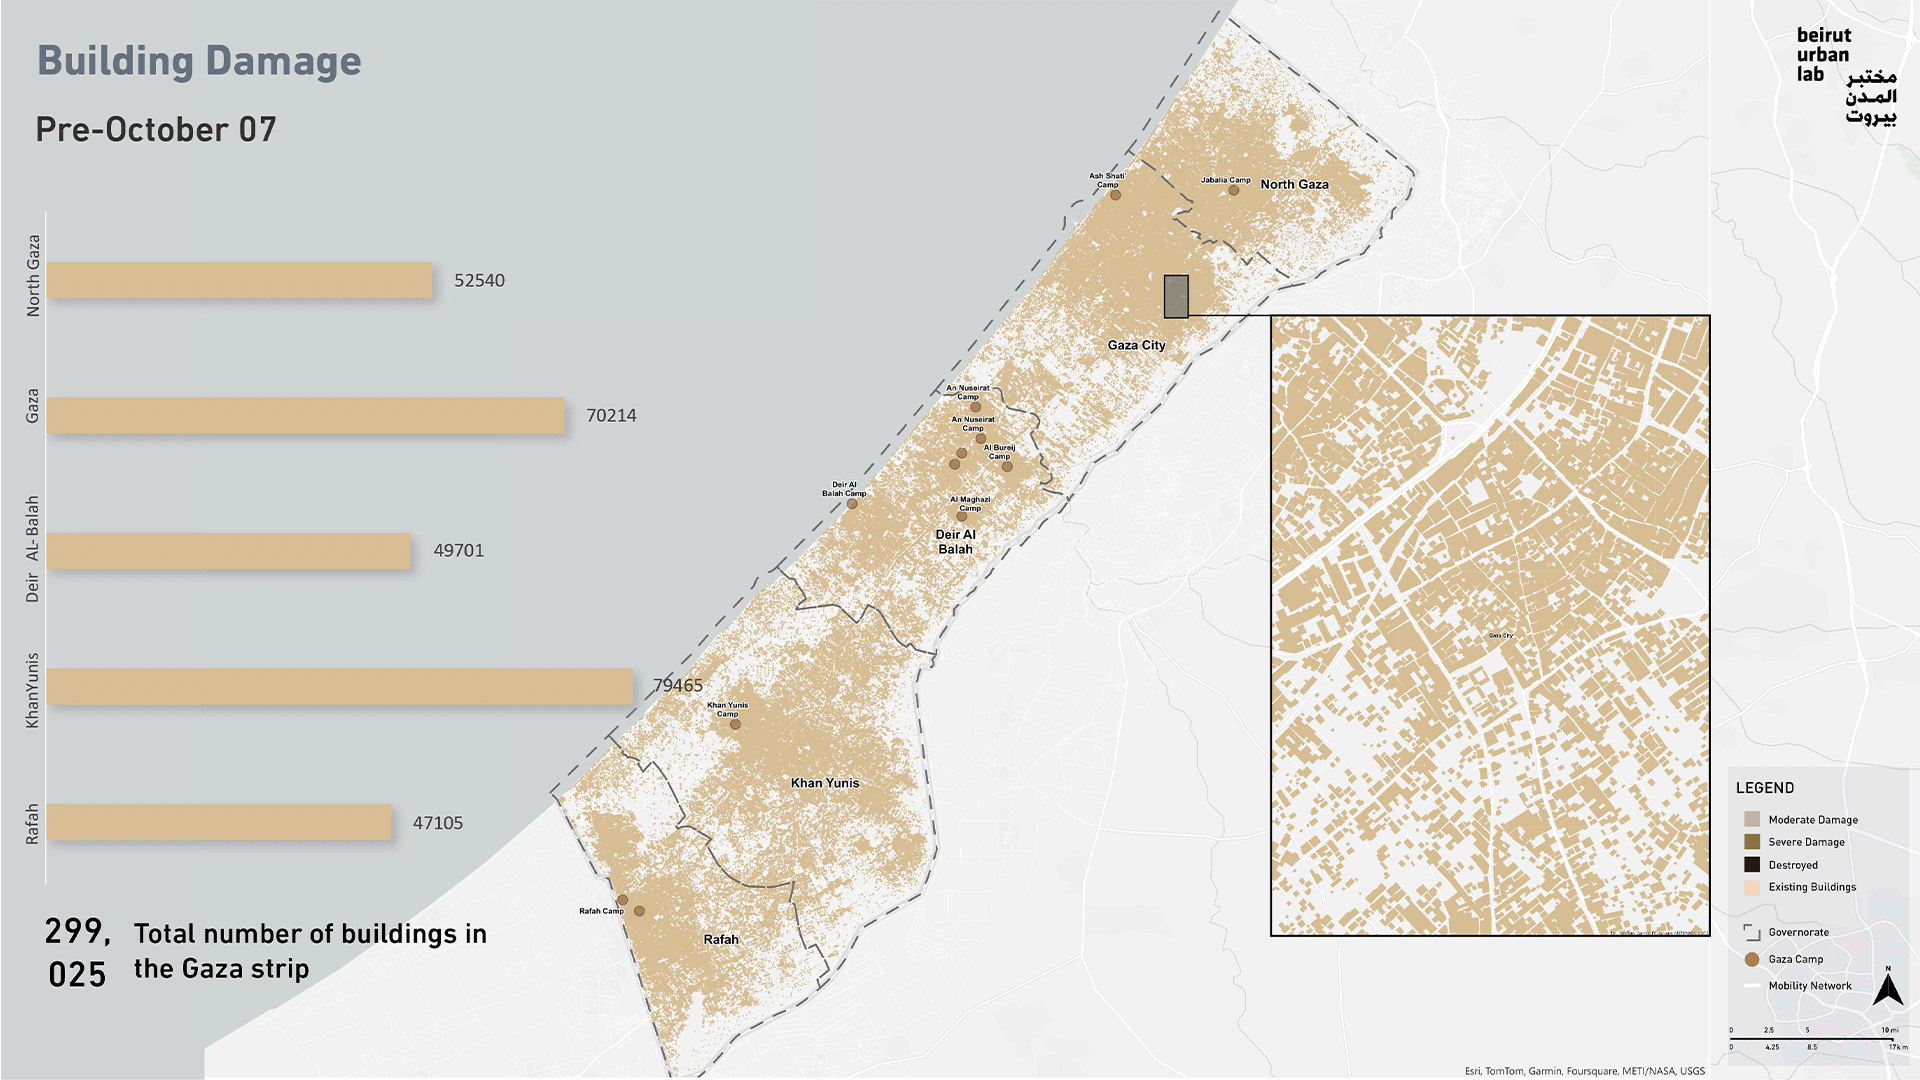 Damages to the buildings in Gaza. Source: Beirut Urban Lab based on data from UNOSAT